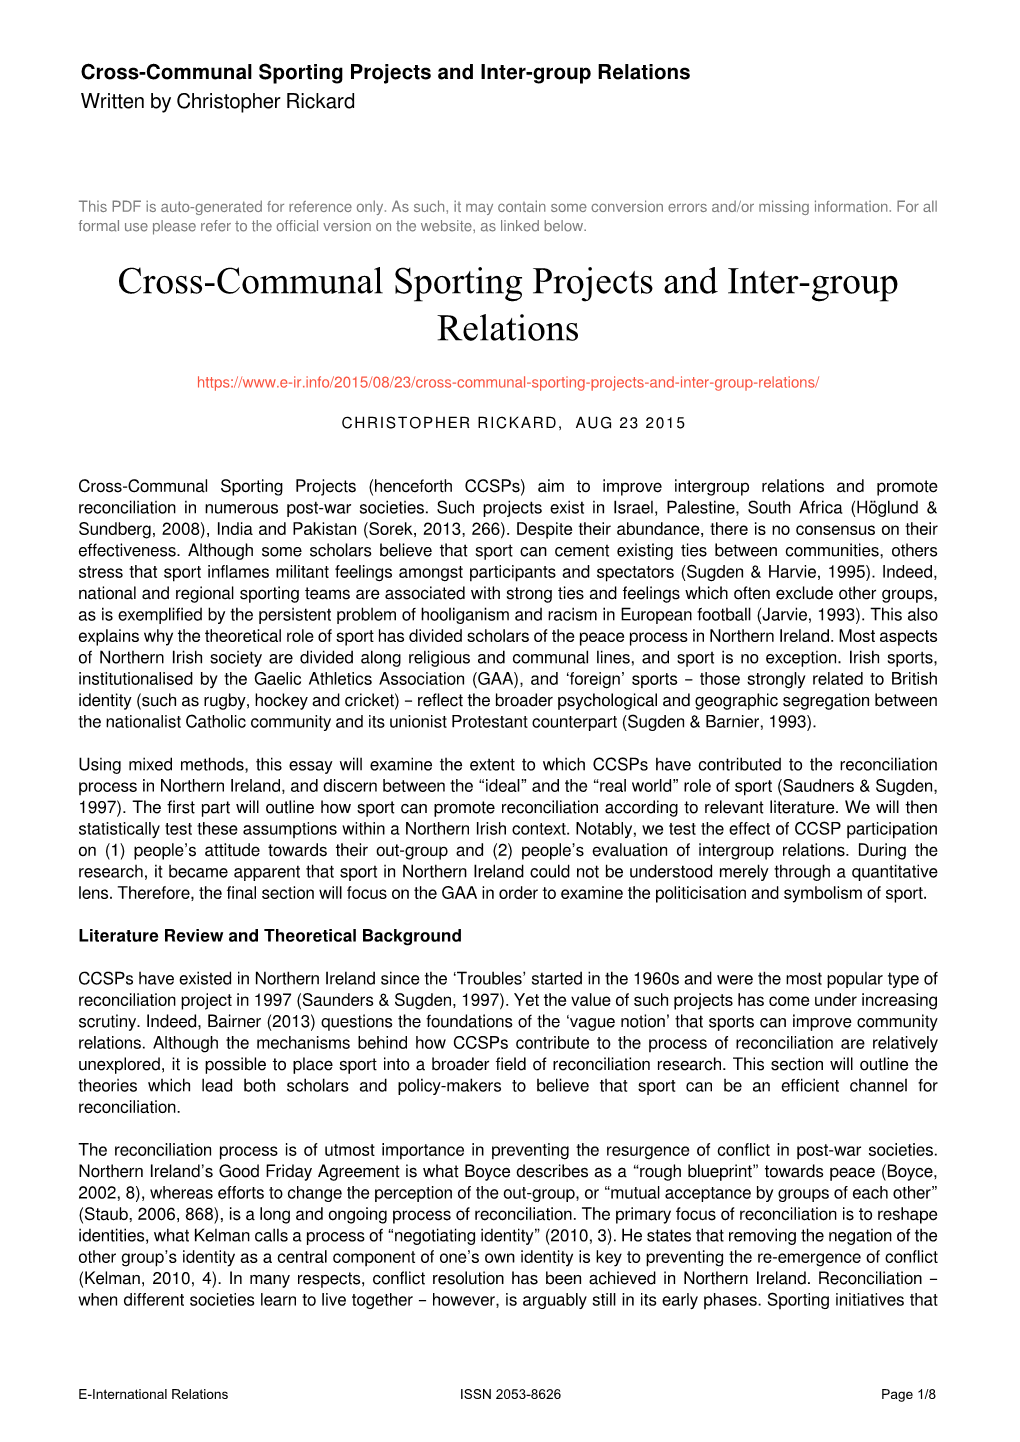 Cross-Communal Sporting Projects and Inter-Group Relations Written by Christopher Rickard